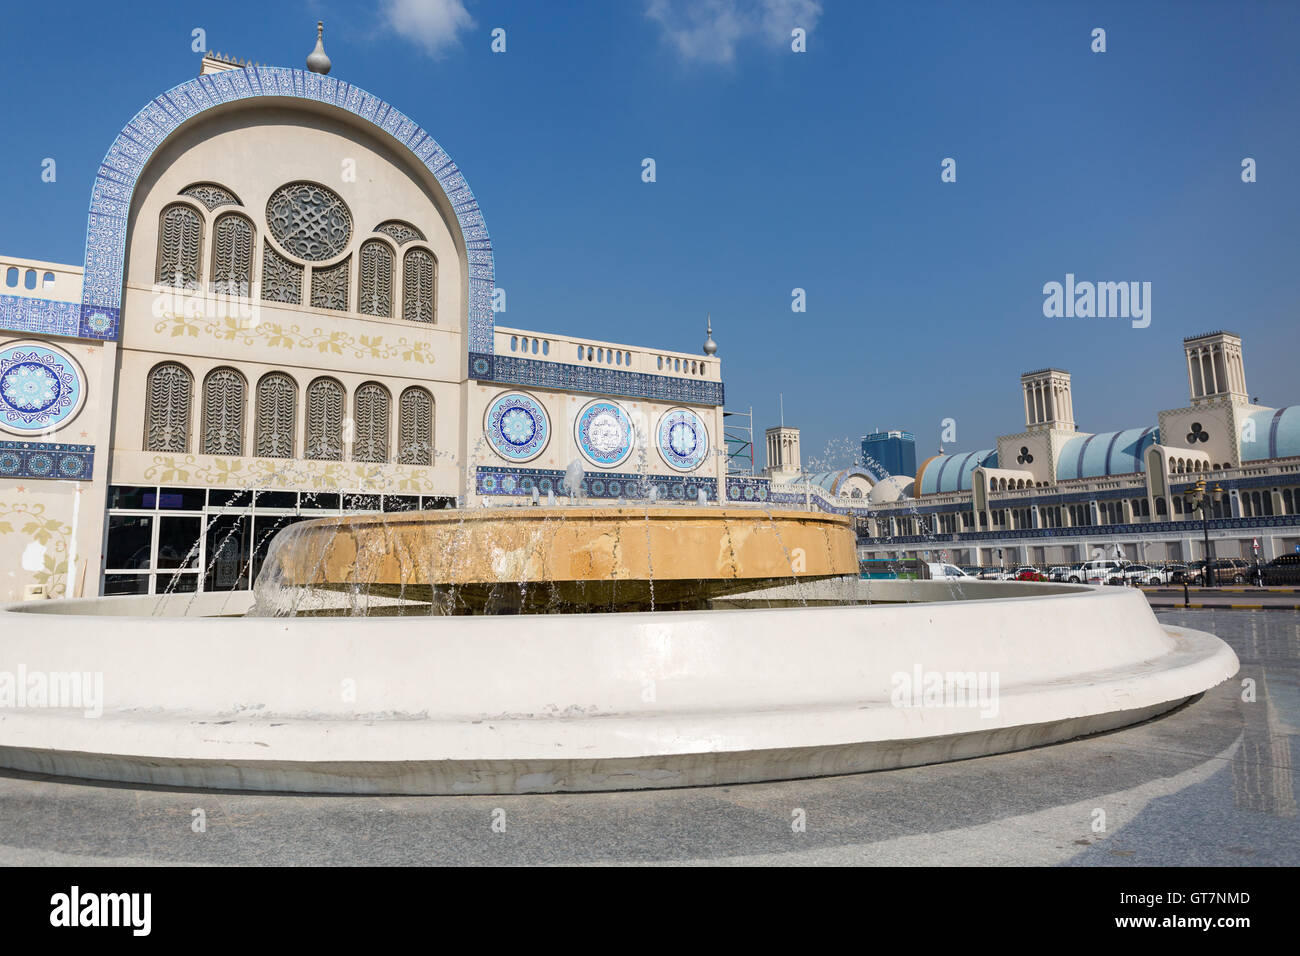 The Central Souk, Sharjah, UAE Stock Photo